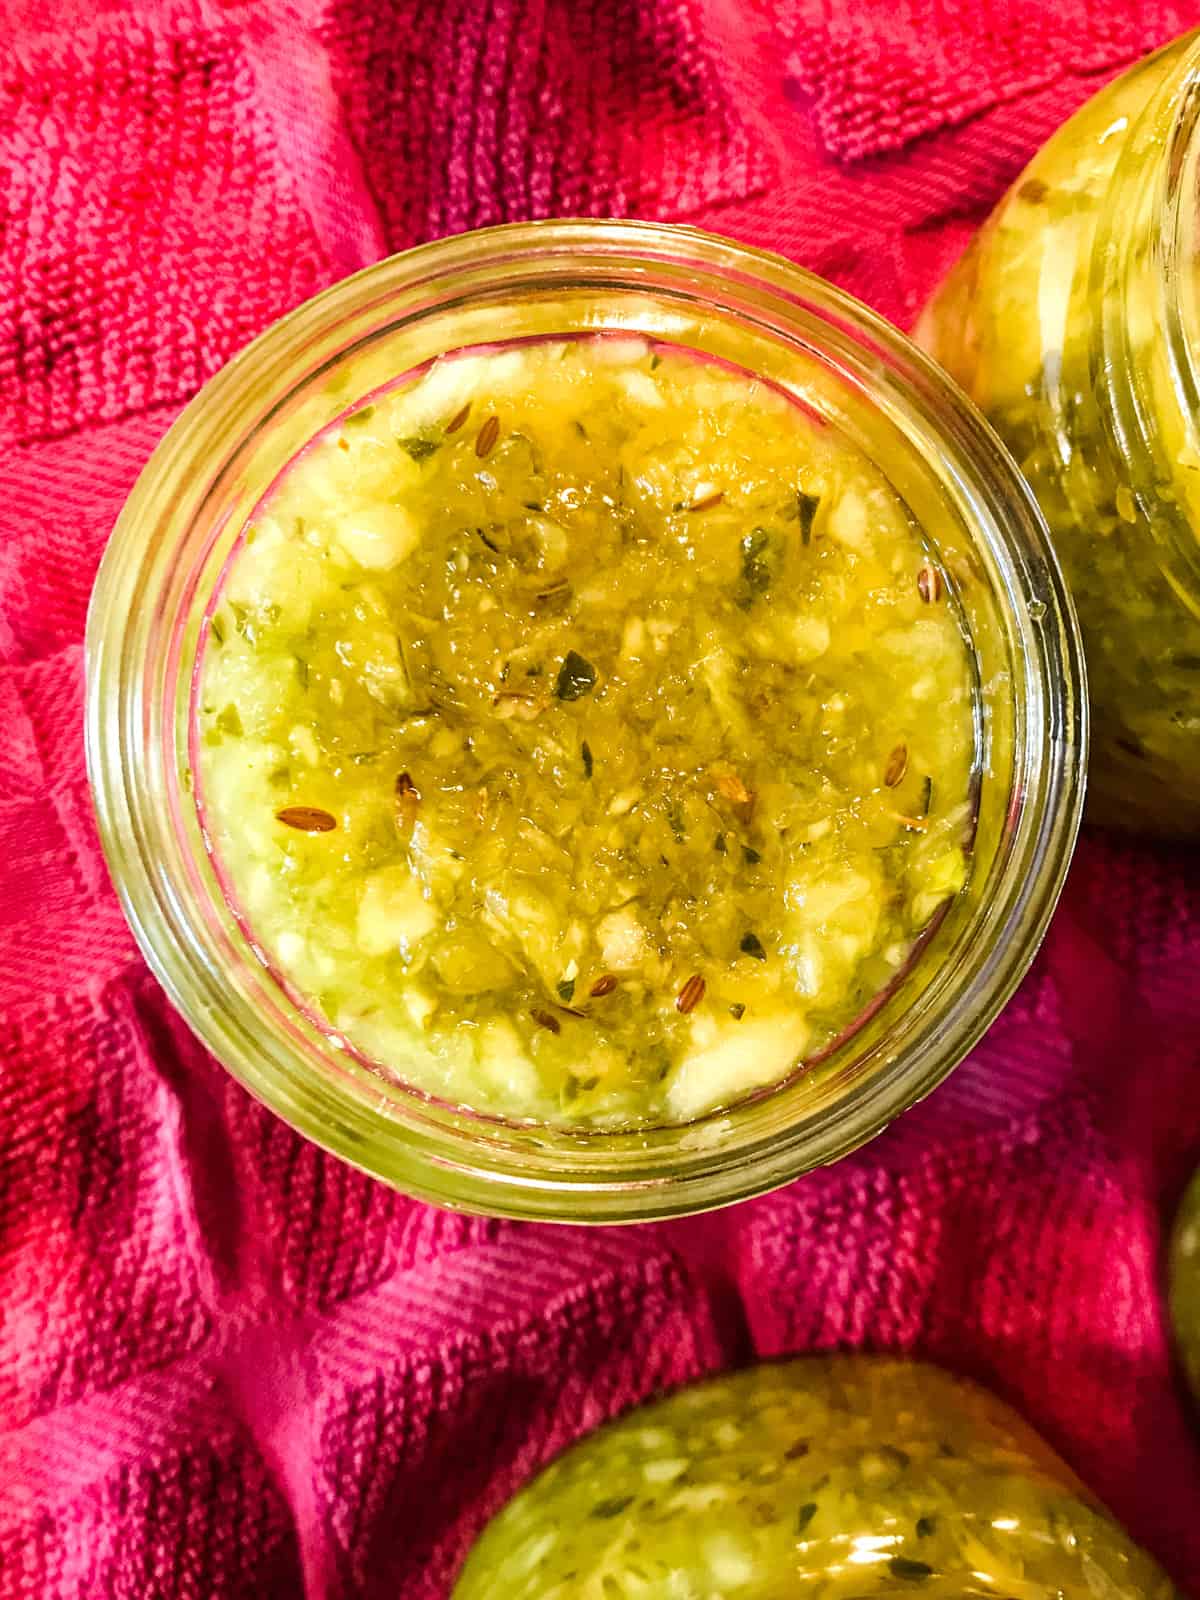 Dill relish in canning jars.